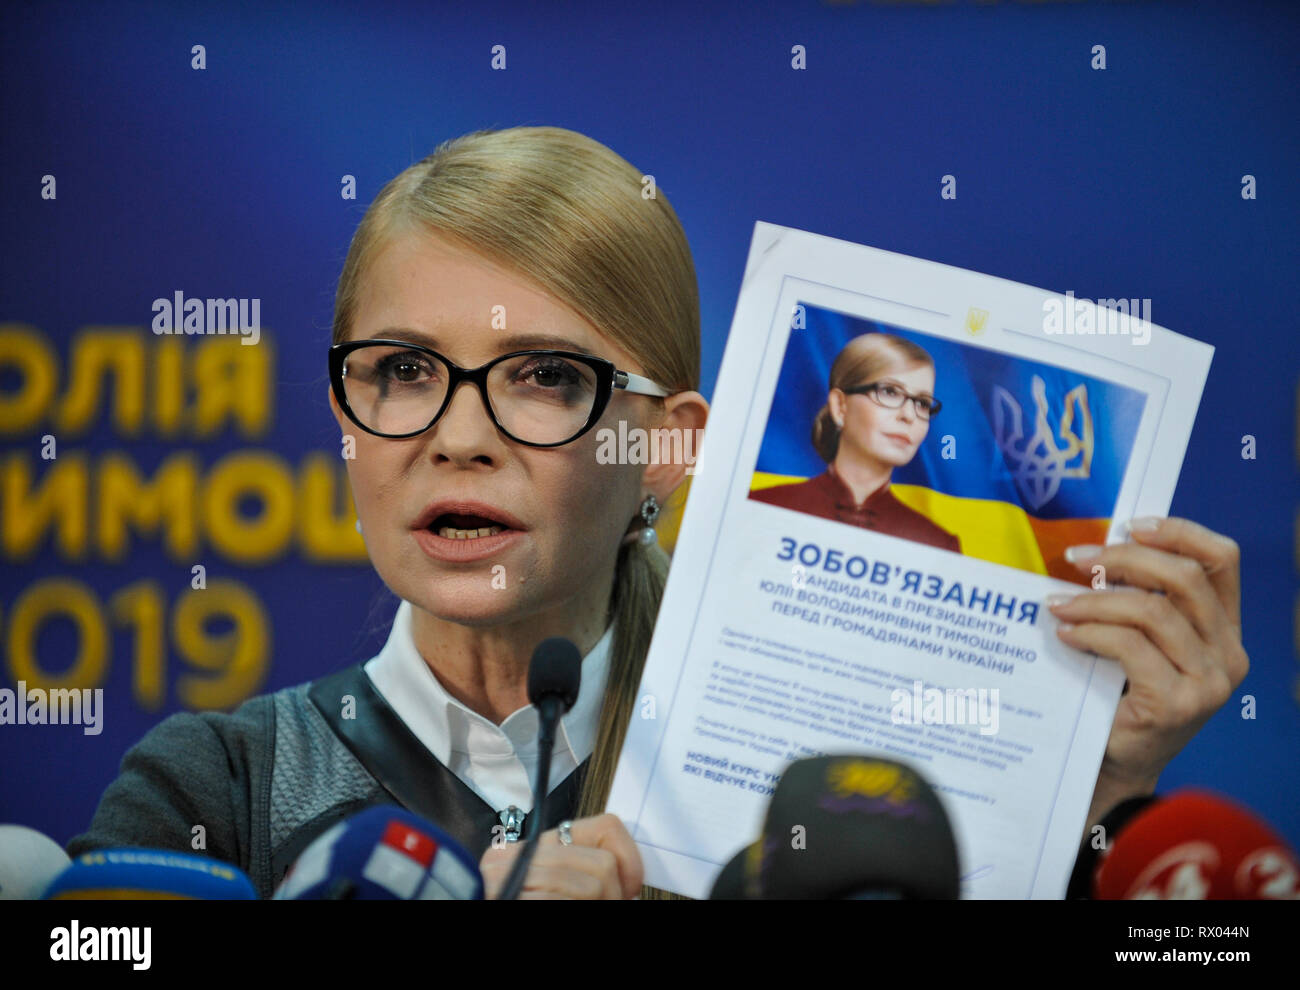 Leader of the Ukrainian political party seen during a press conference.  Ukrainian presidential candidate Yulia Tymoshenko has signed commitments to voters of Ukraine. Stock Photo